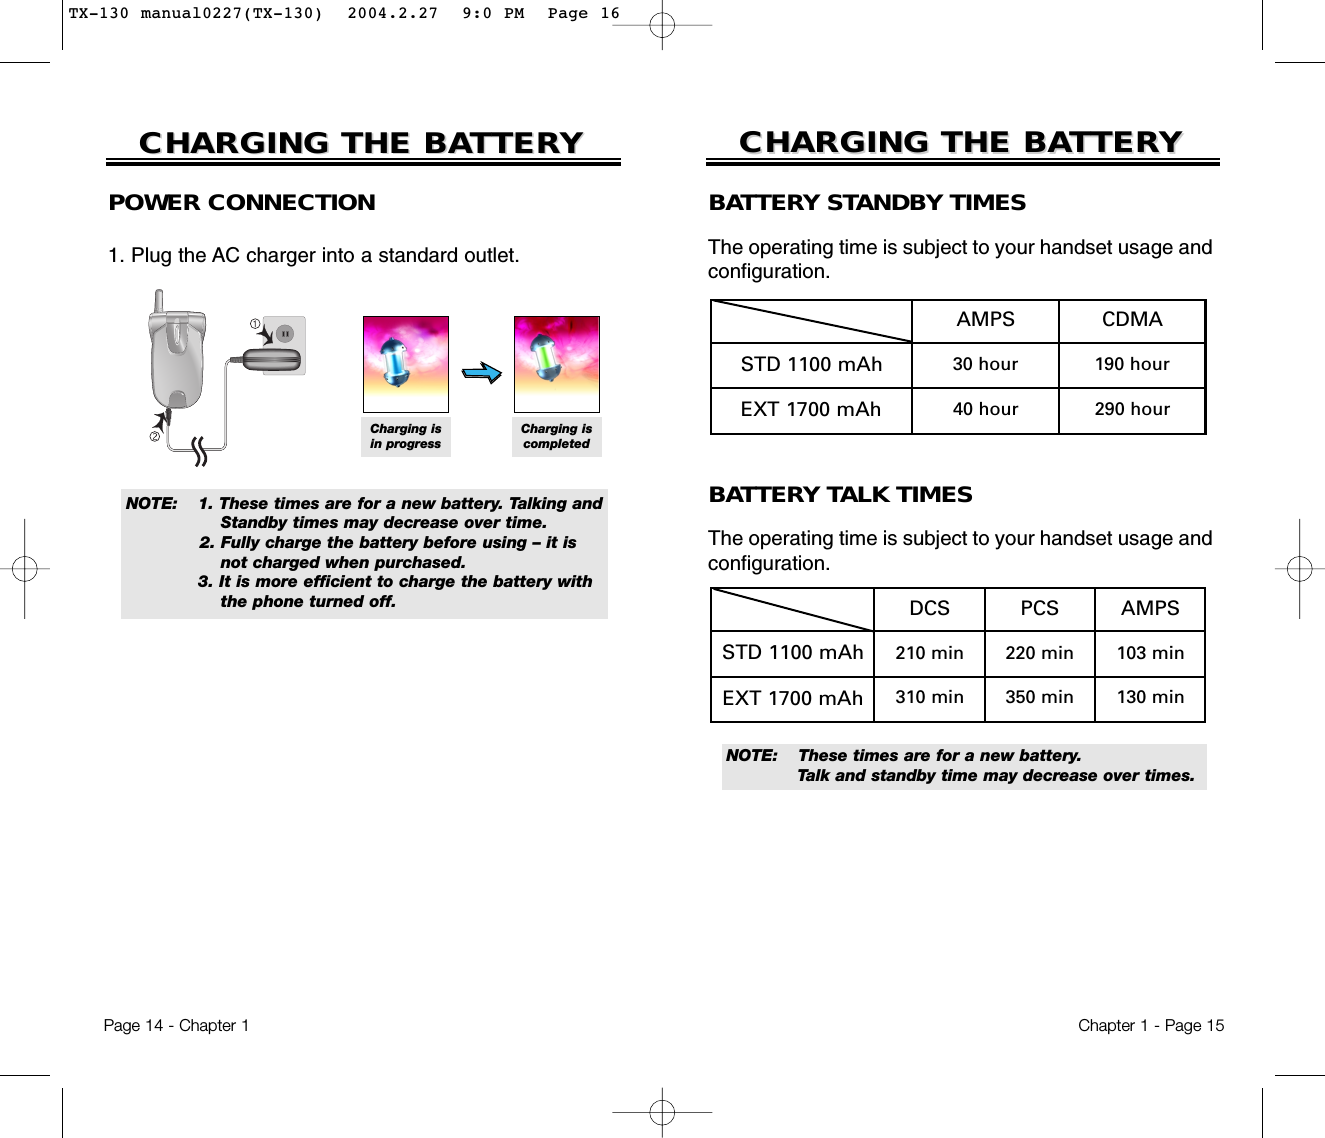 CHARGING THE BACHARGING THE BATTERTTERYYNOTE: These times are for a new battery. Talk and standby time may decrease over times.BATTERY TALK TIMESThe operating time is subject to your handset usage andconfiguration.BATTERY STANDBY TIMESThe operating time is subject to your handset usage andconfiguration.Chapter 1 - Page 15CHARGING THE BACHARGING THE BATTERTTERYYPage 14 - Chapter 1POWER CONNECTION1. Plug the AC charger into a standard outlet.NOTE:  1. These times are for a new battery. Talking andStandby times may decrease over time.2. Fully charge the battery before using – it is not charged when purchased.3. It is more efficient to charge the battery with the phone turned off. DCSSTD 1100 mAhEXT 1700 mAh210 min310 minPCS220 min350 minAMPS103 min130 minCharging isin progressCharging iscompletedAMPSSTD 1100 mAhEXT 1700 mAh30 hour40 hourCDMA190 hour290 hourTX-130 manual0227(TX-130)  2004.2.27  9:0 PM  Page 16